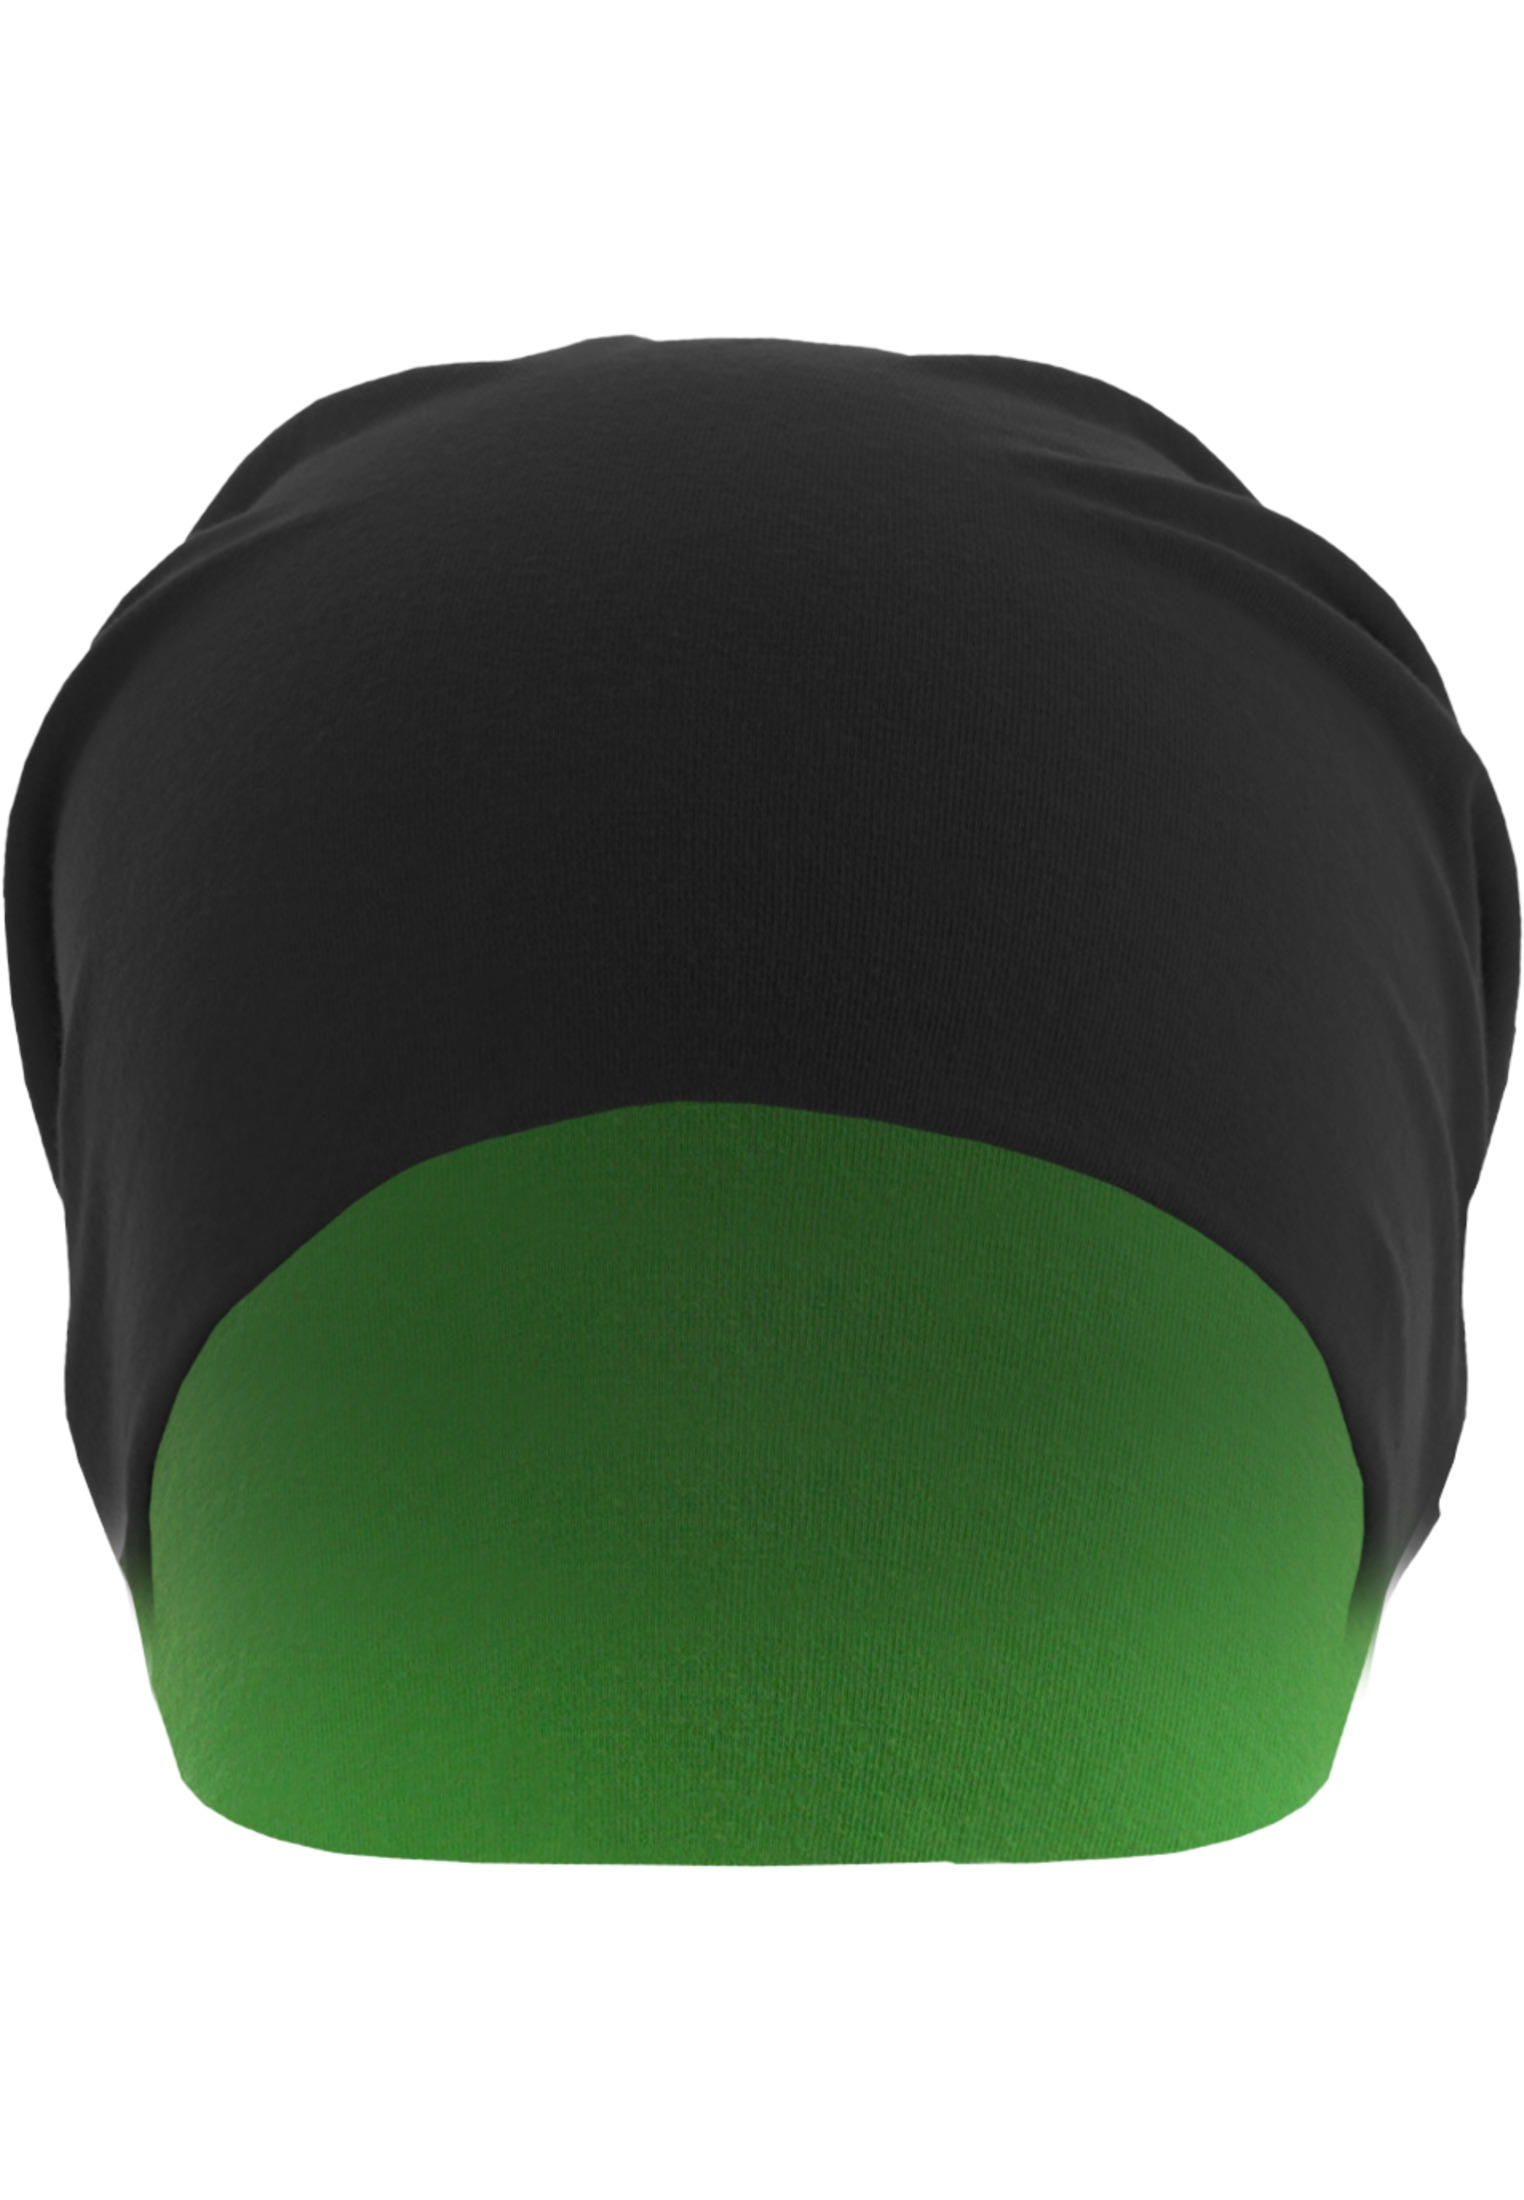 Caps & Beanies Jersey Beanie reversible in Farbe blk/neongreen